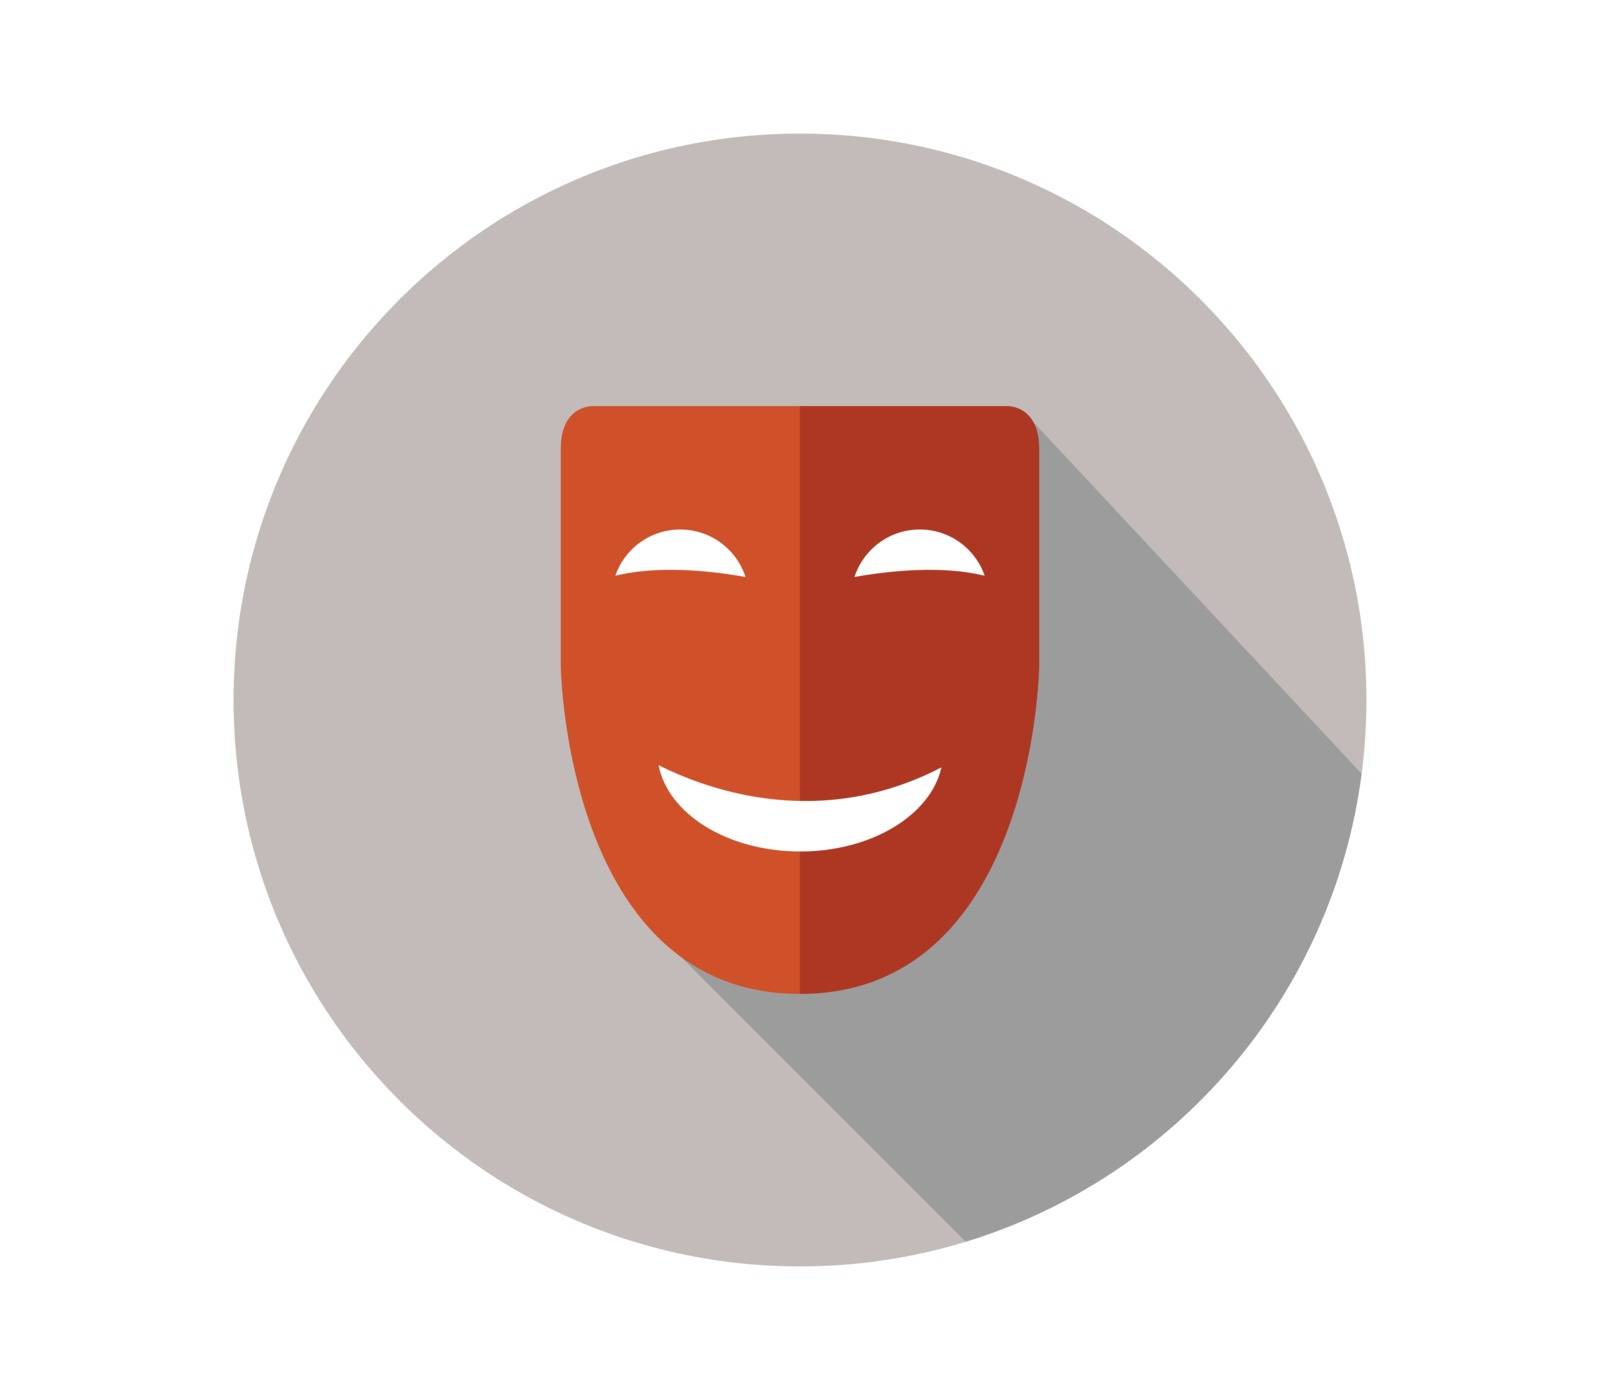 theater mask icon by Mark1987